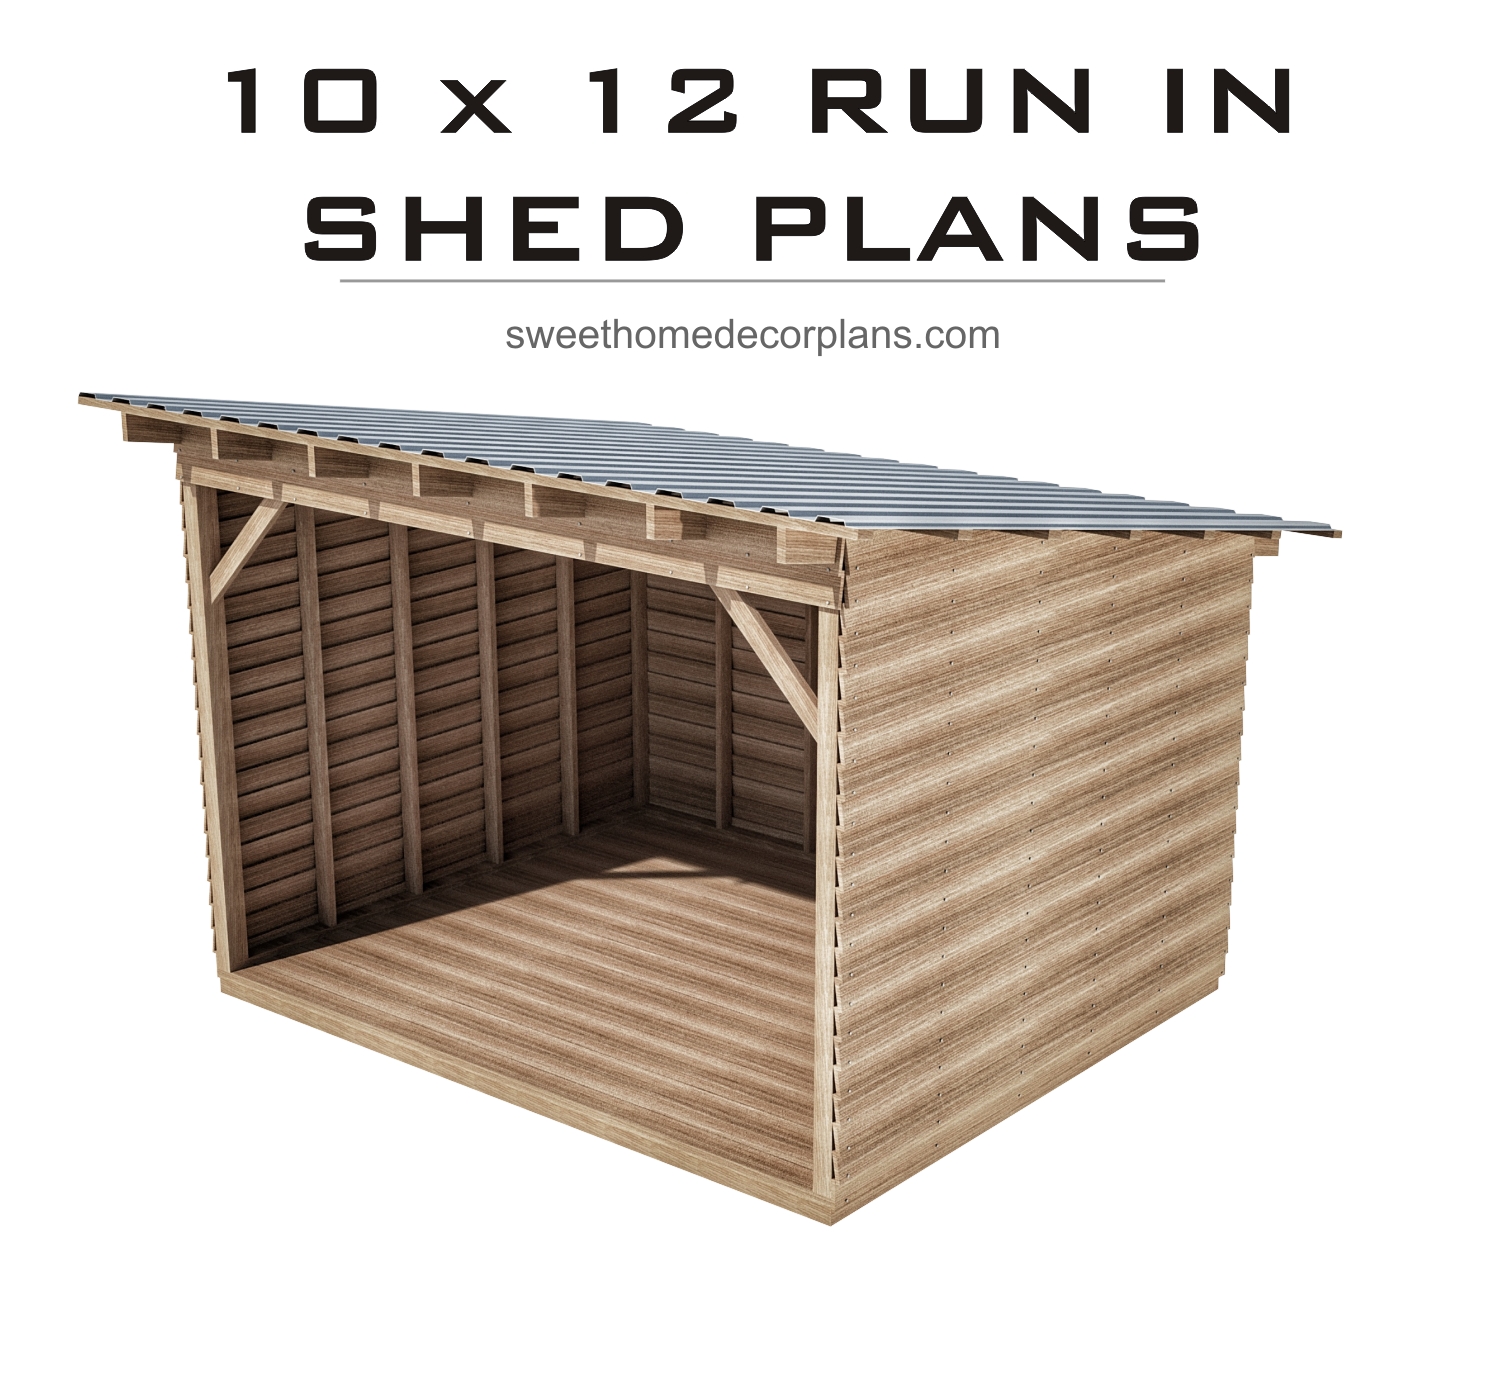 wooden-10-x-12-run-in-shed-plans-for-outdoor